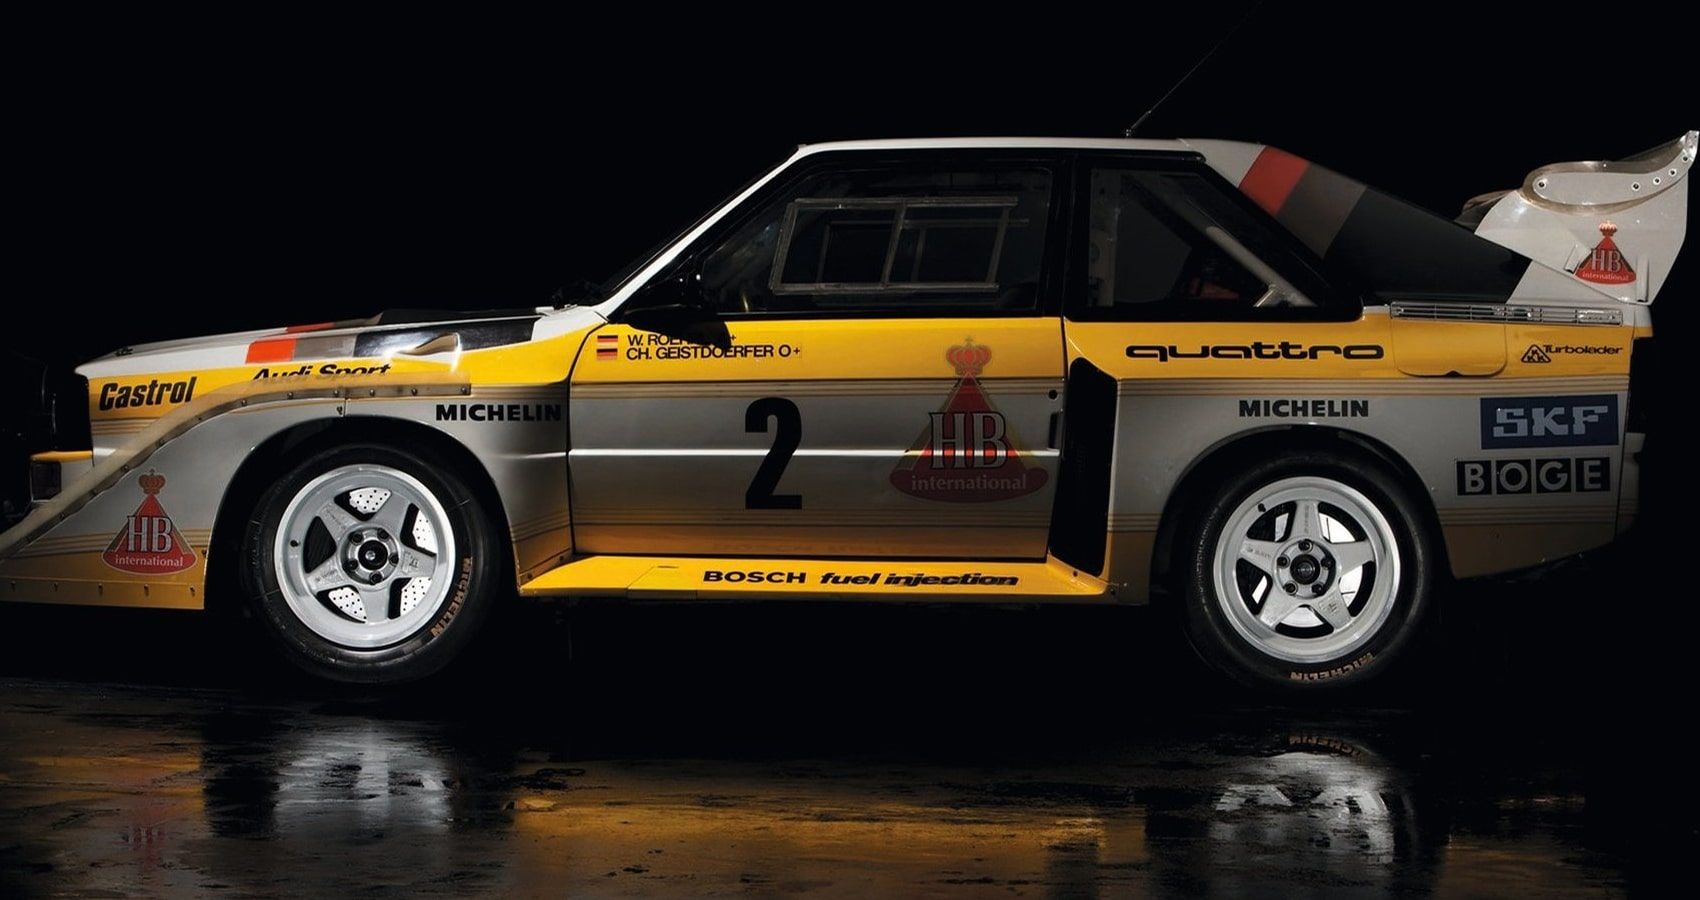 Ready To Race: 1981 Audi quattro Group 4 – A 1980s Rally Icon